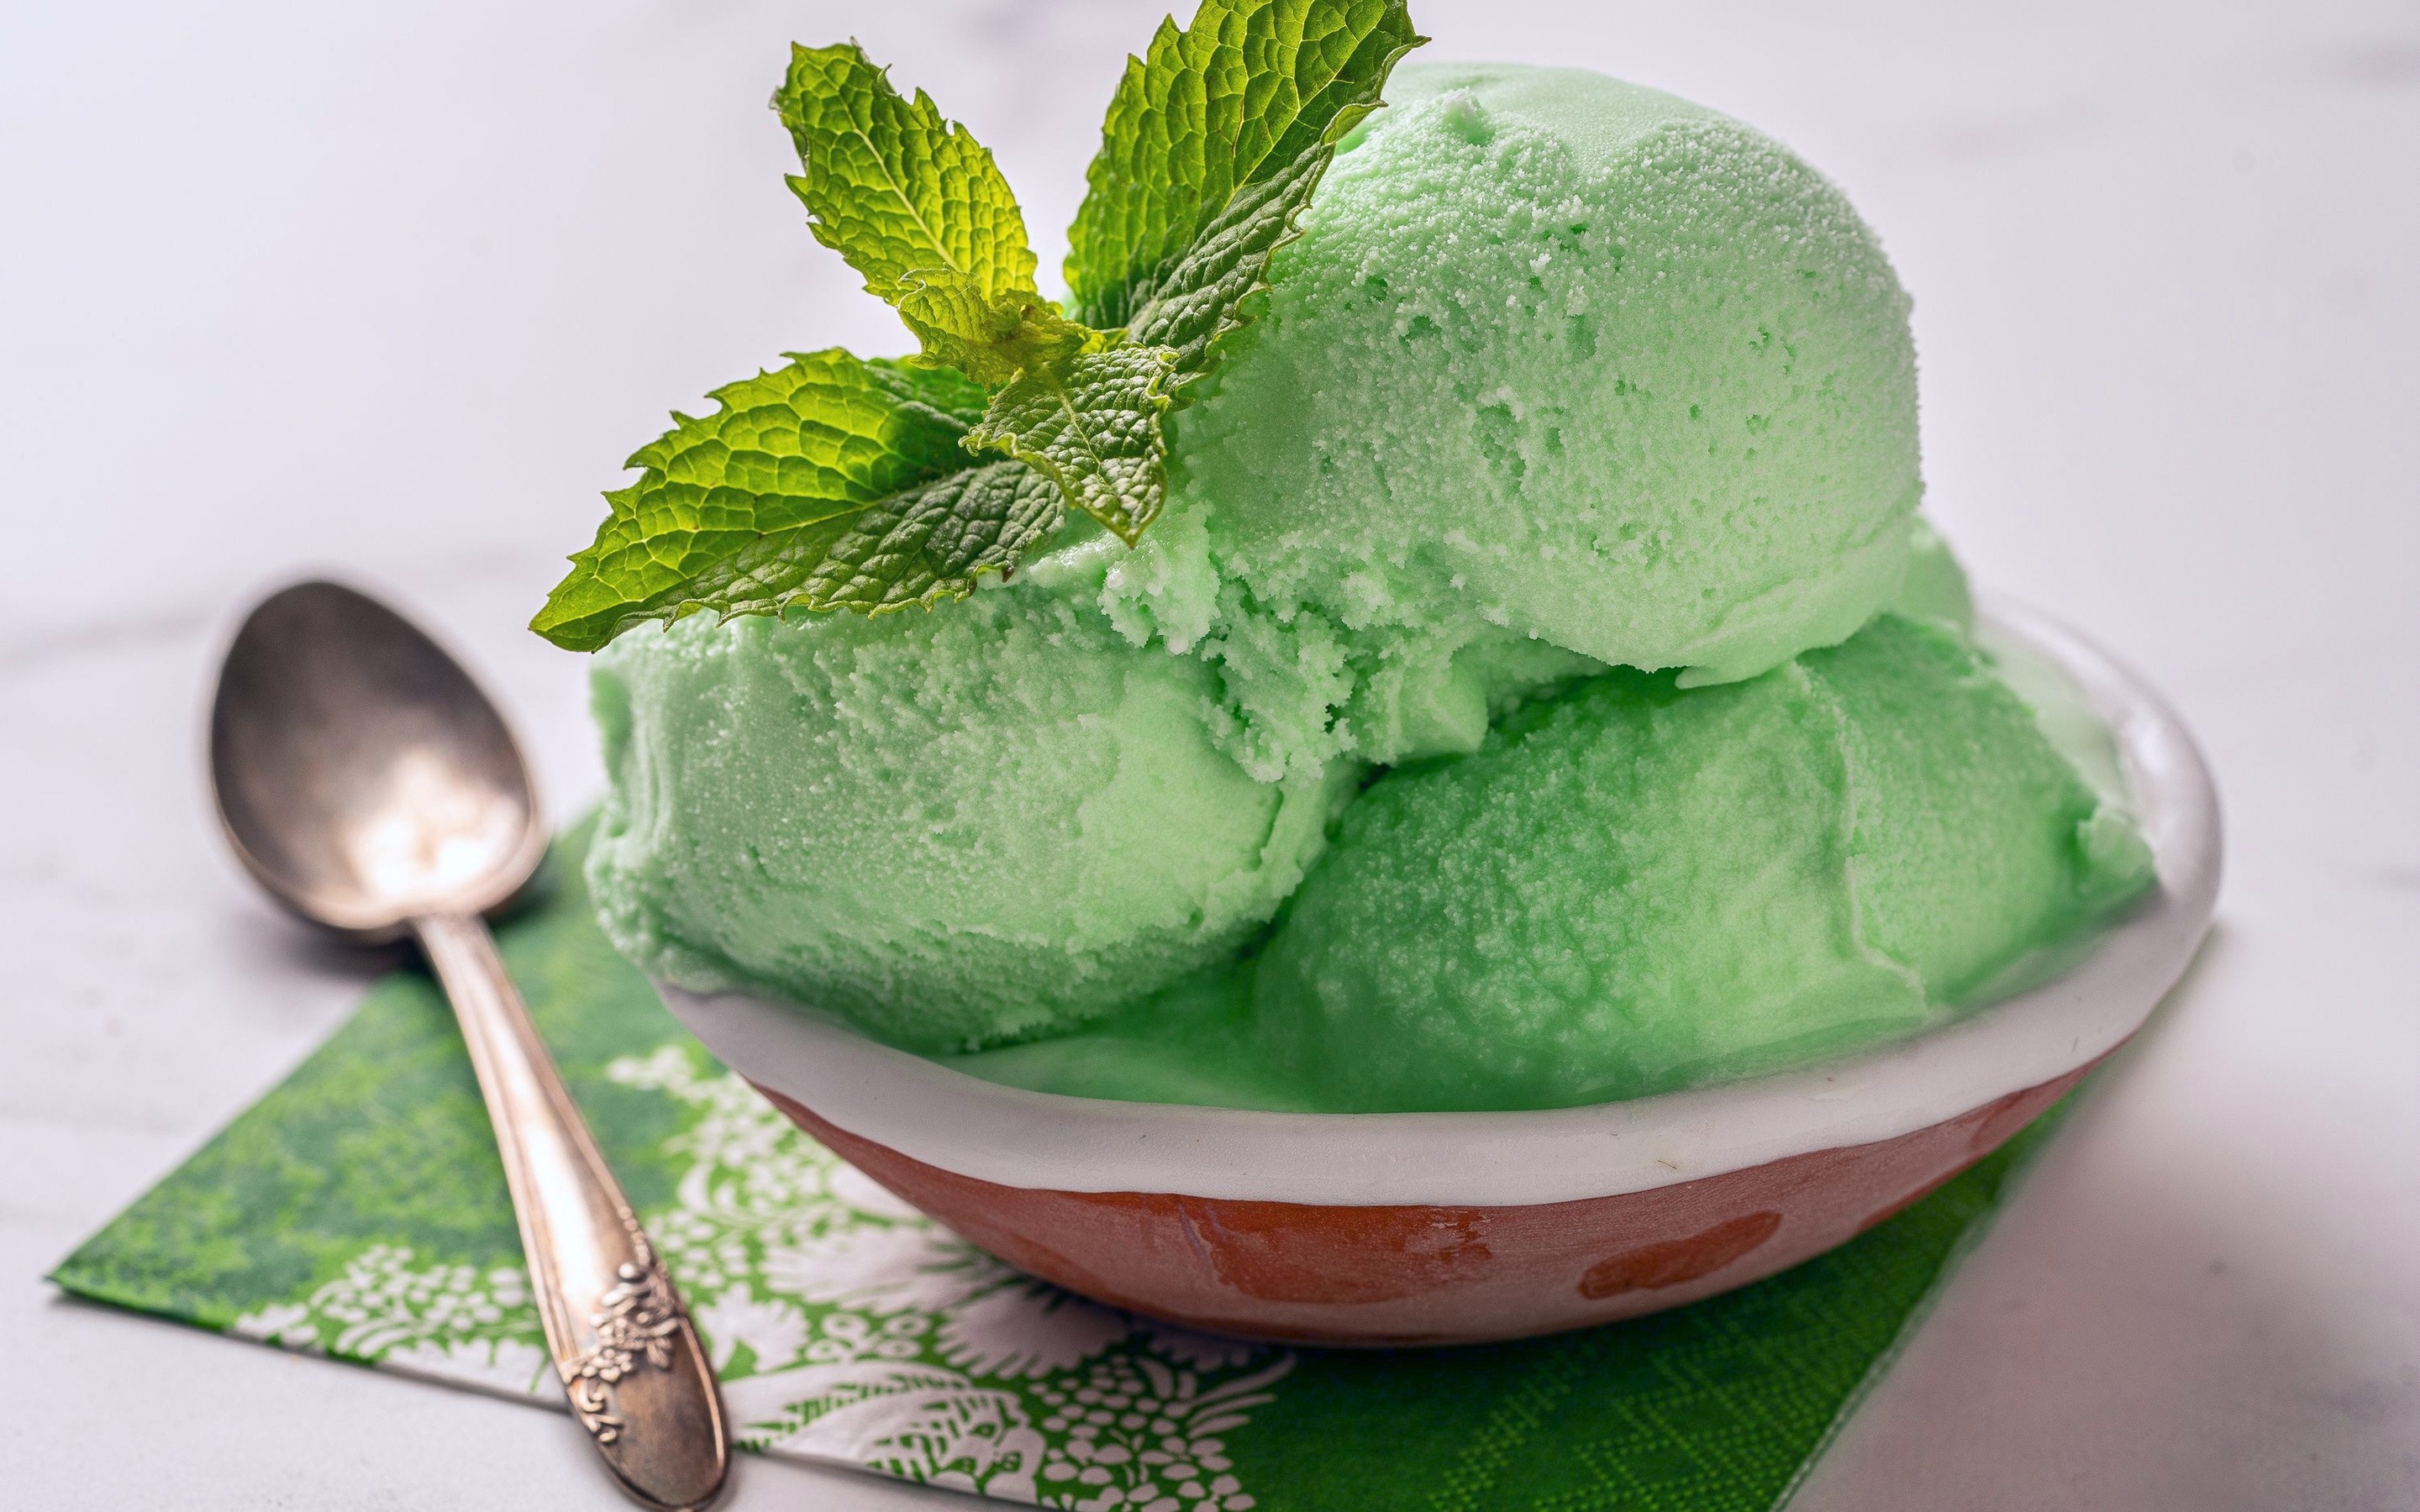 Mint ice cream, Soothing and refreshing, HD wallpapers, Cool summer treat, 2880x1800 HD Desktop